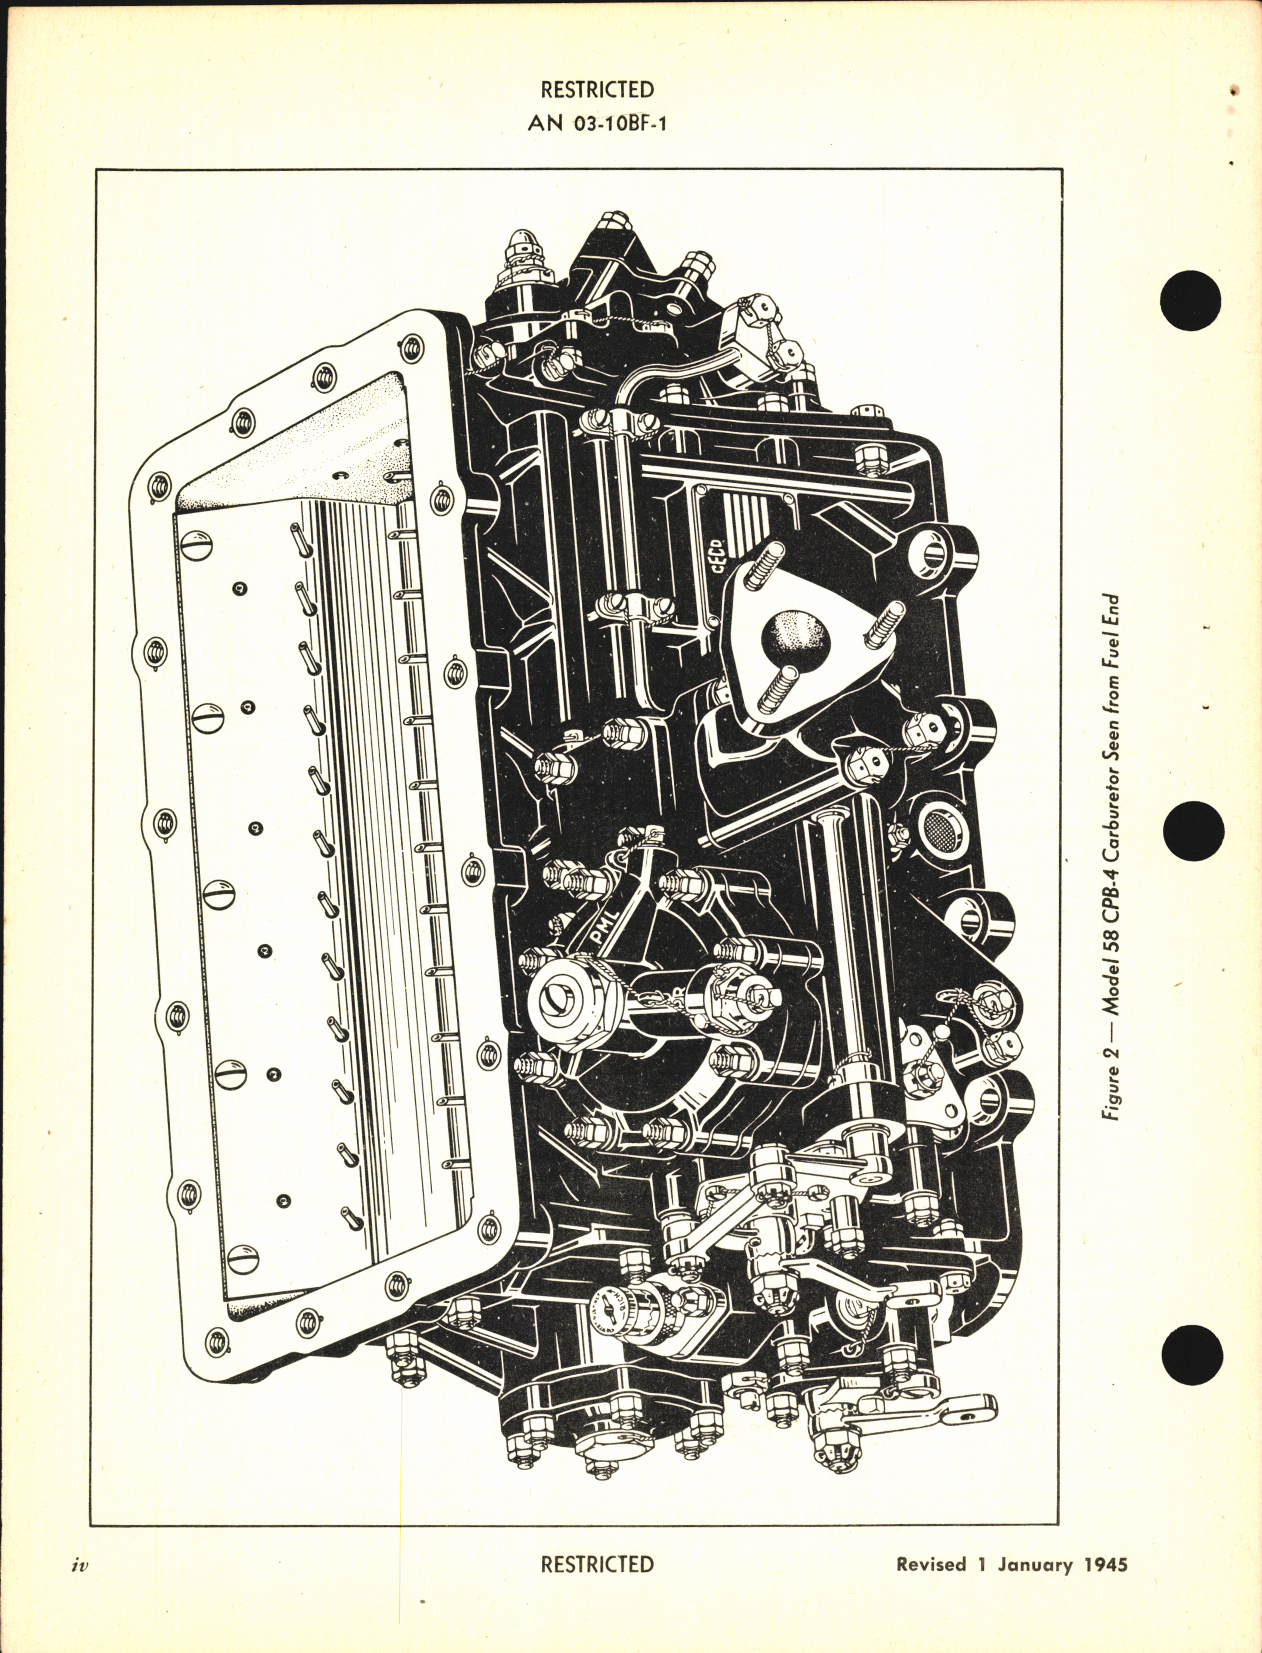 Sample page 6 from AirCorps Library document: Handbook of Instructions with Parts Catalog for Hydro-Metering Carburetor Model 58CPB-4